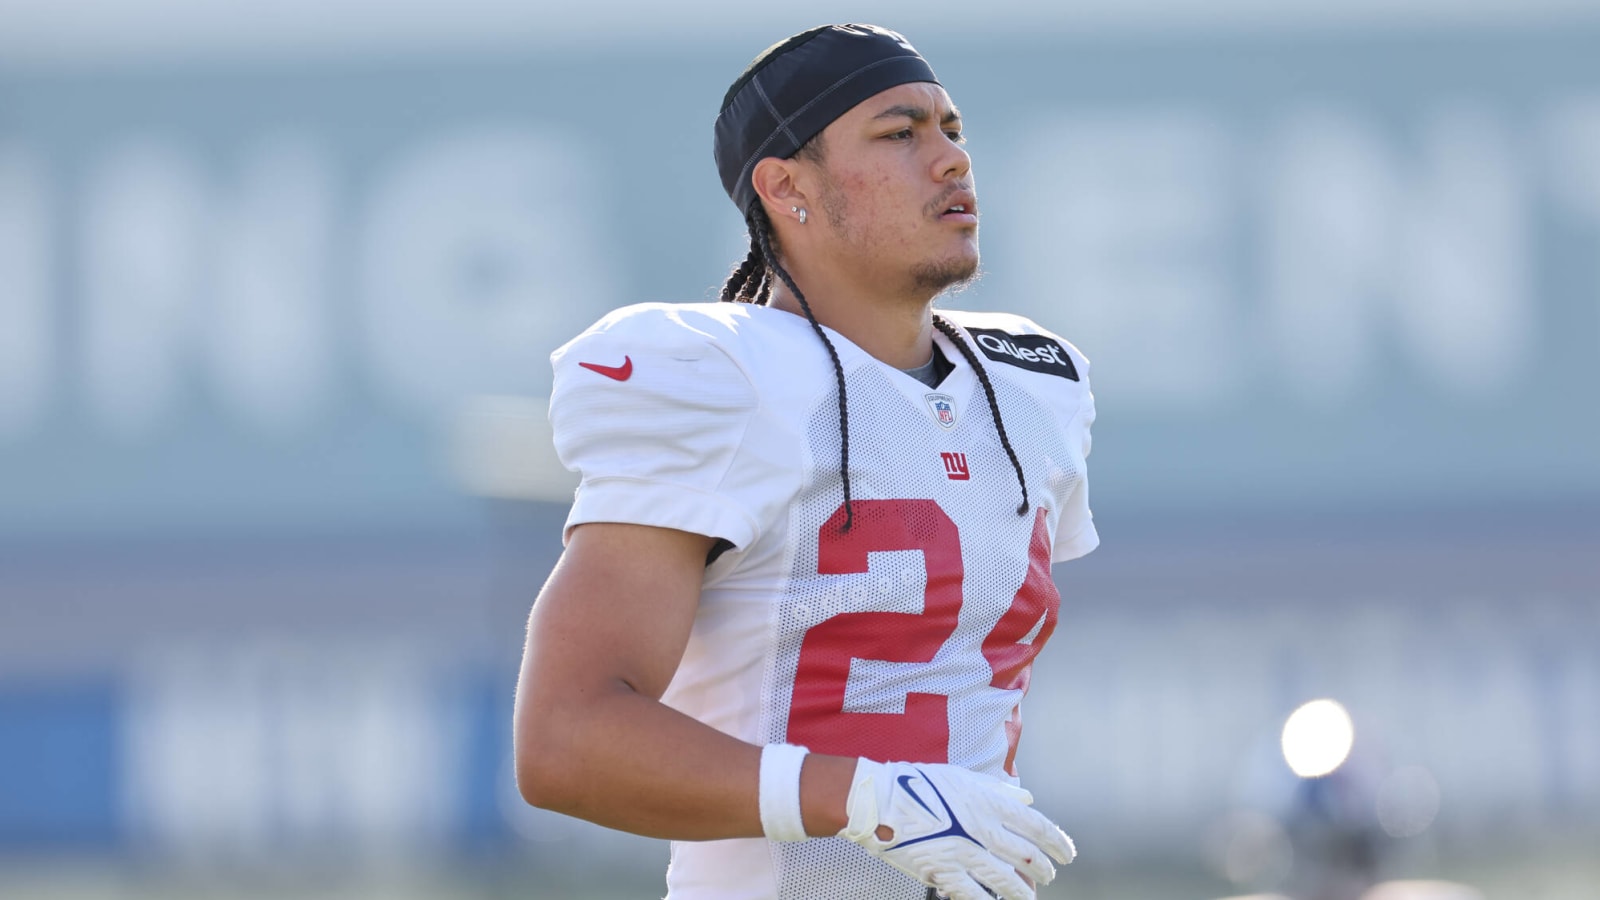 Giants’ 2nd year safety making waves in preseason